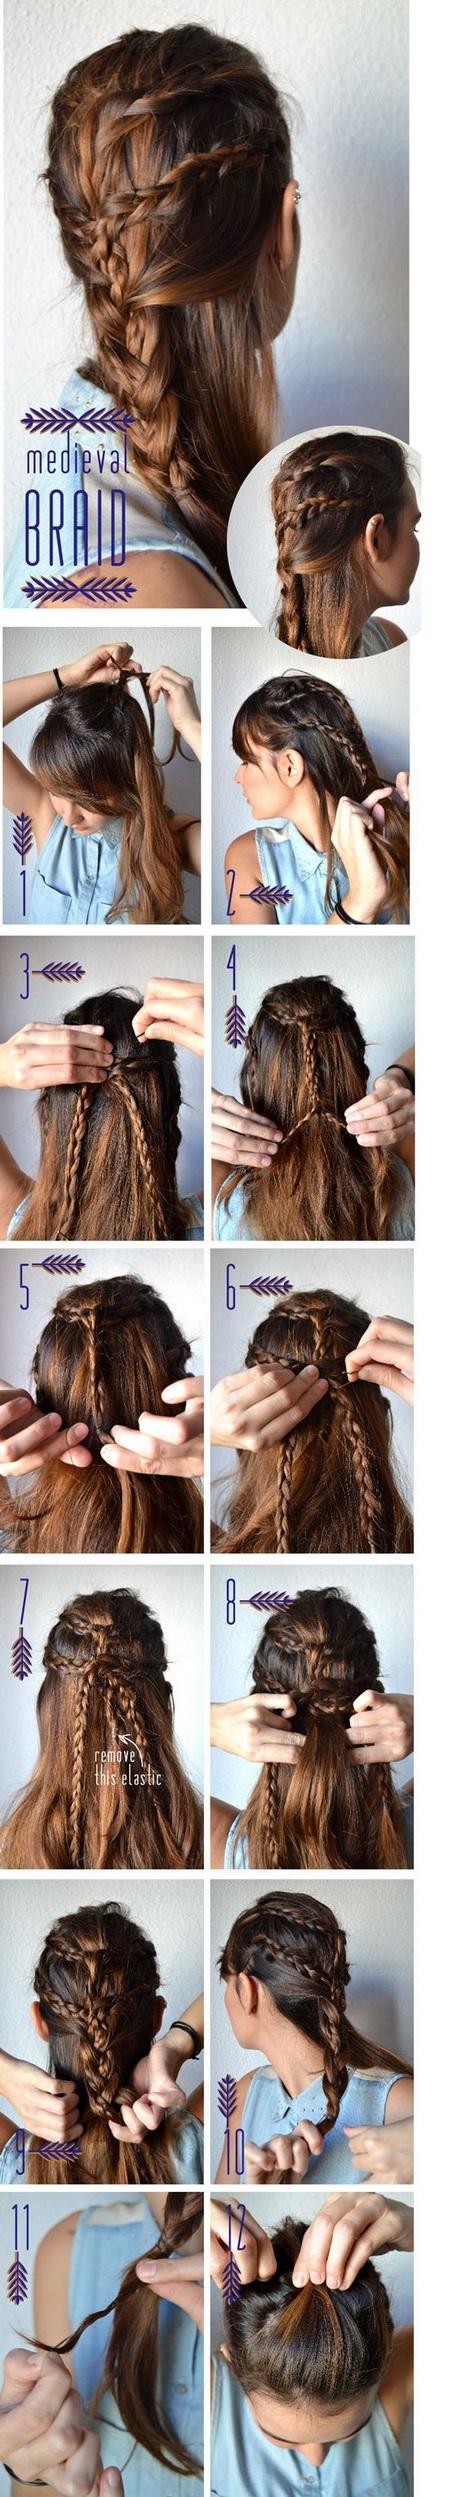 5 hairstyles to try tonight 5-hairstyles-to-try-tonight-92_2